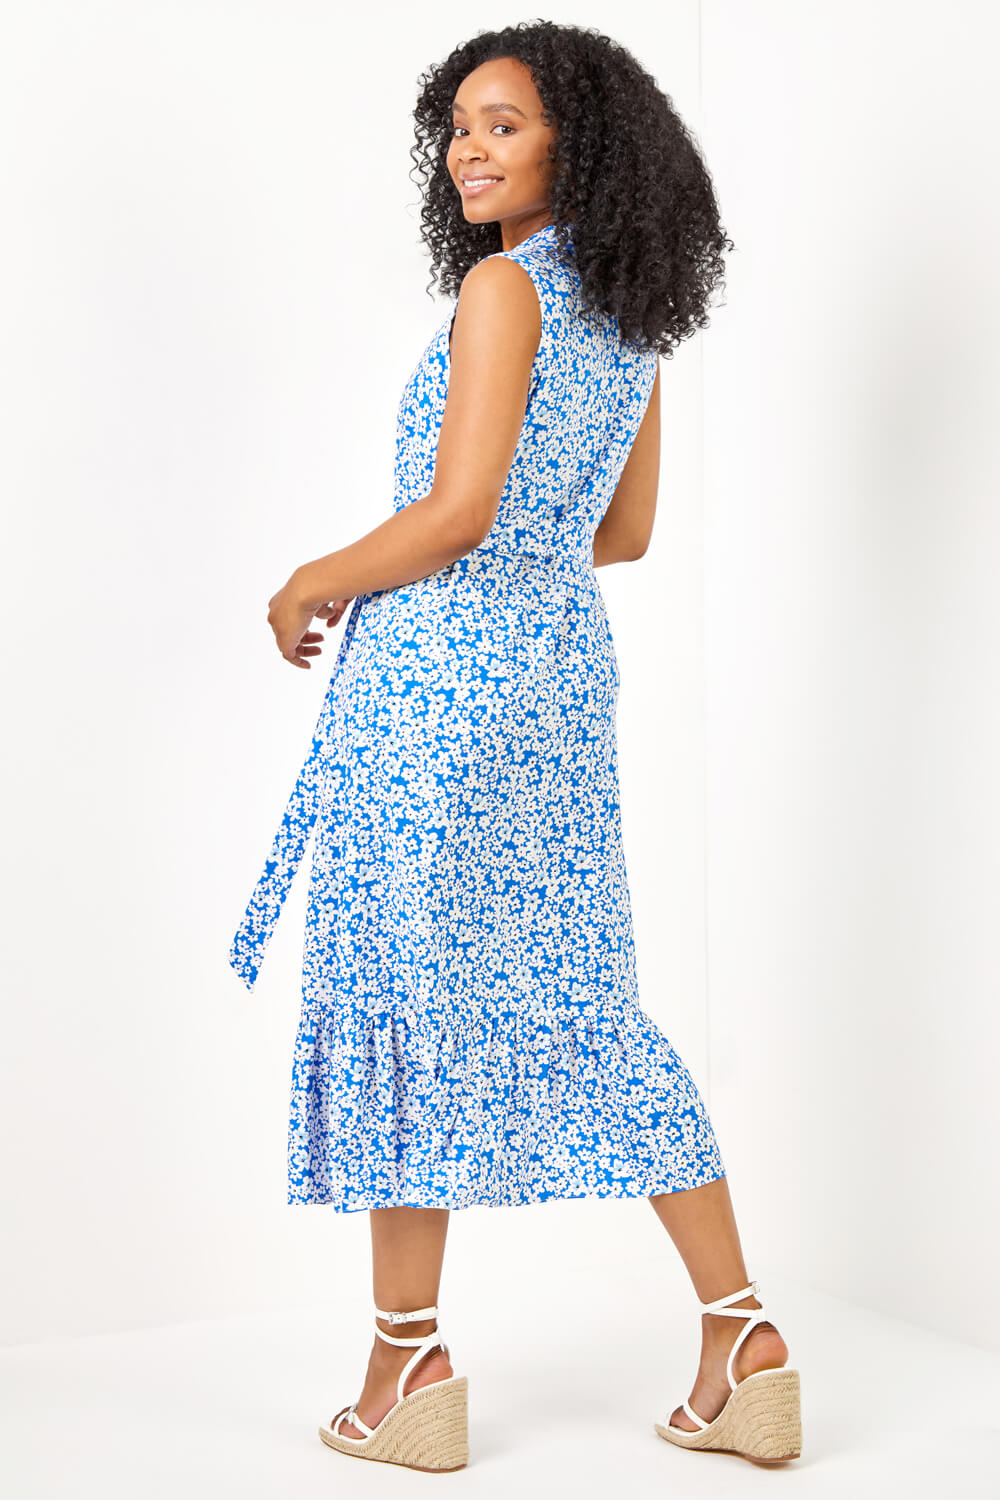 Blue Petite Ditsy Floral Print Frill Tiered Dress, Image 3 of 5